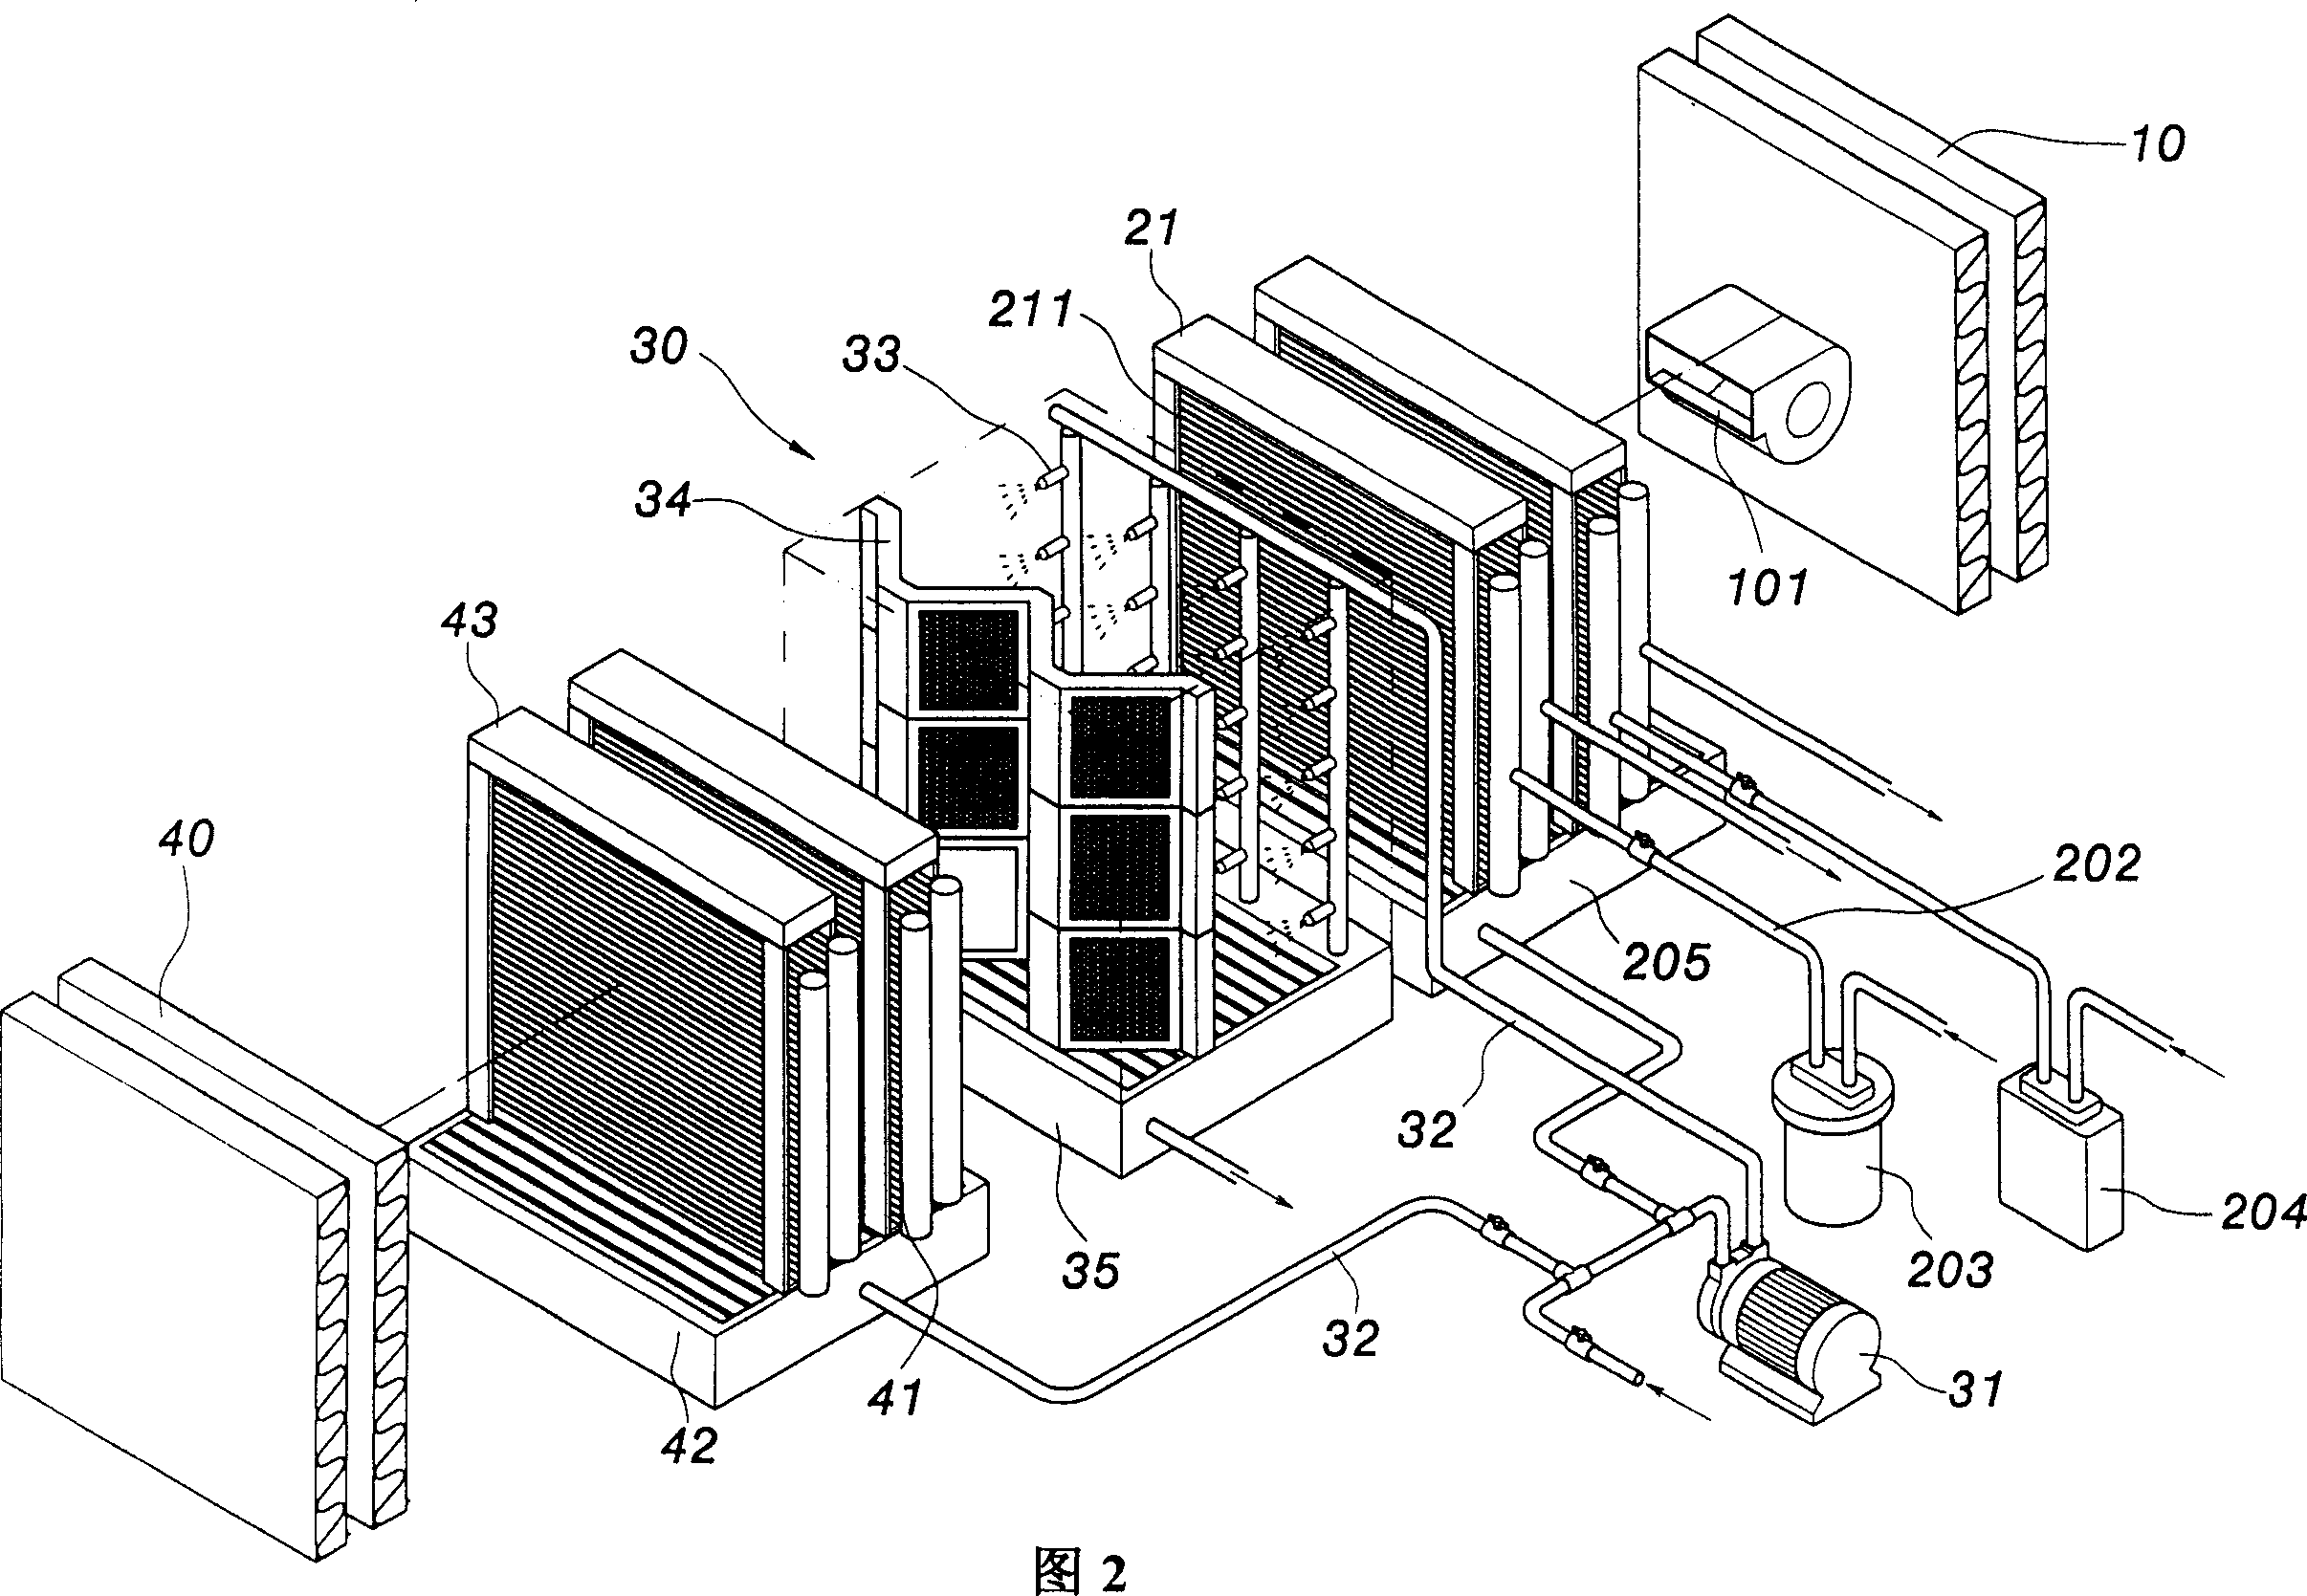 Condensated water circulating and reusing system and method